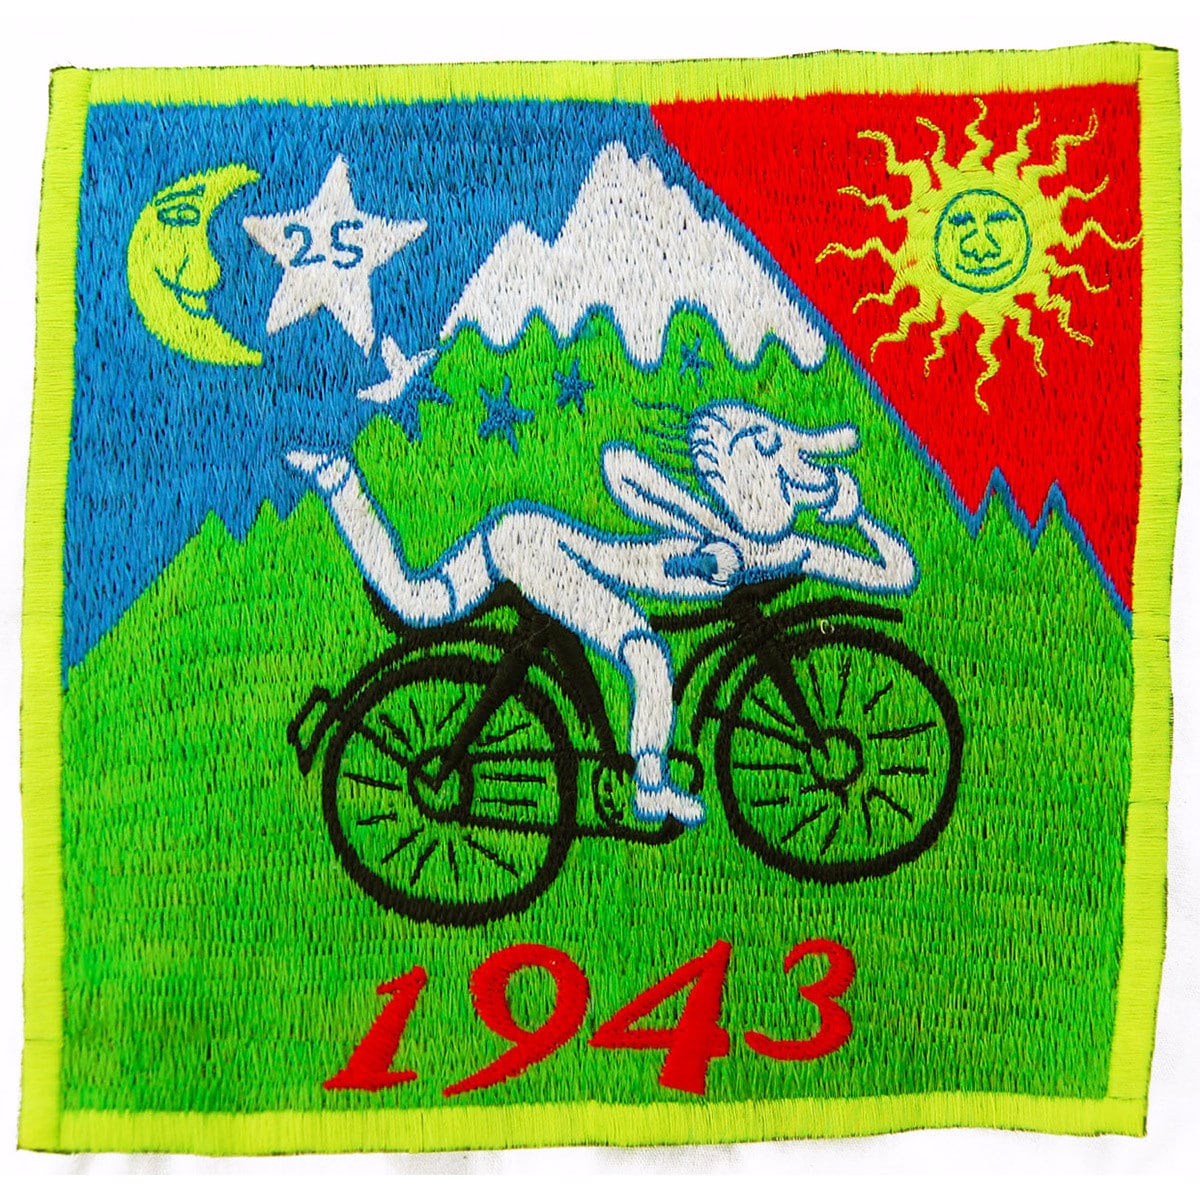 hofmann orignal bicycle day - Design your jacket in any colours -handmade in your size blacklight active 1 zip lock inside pocket